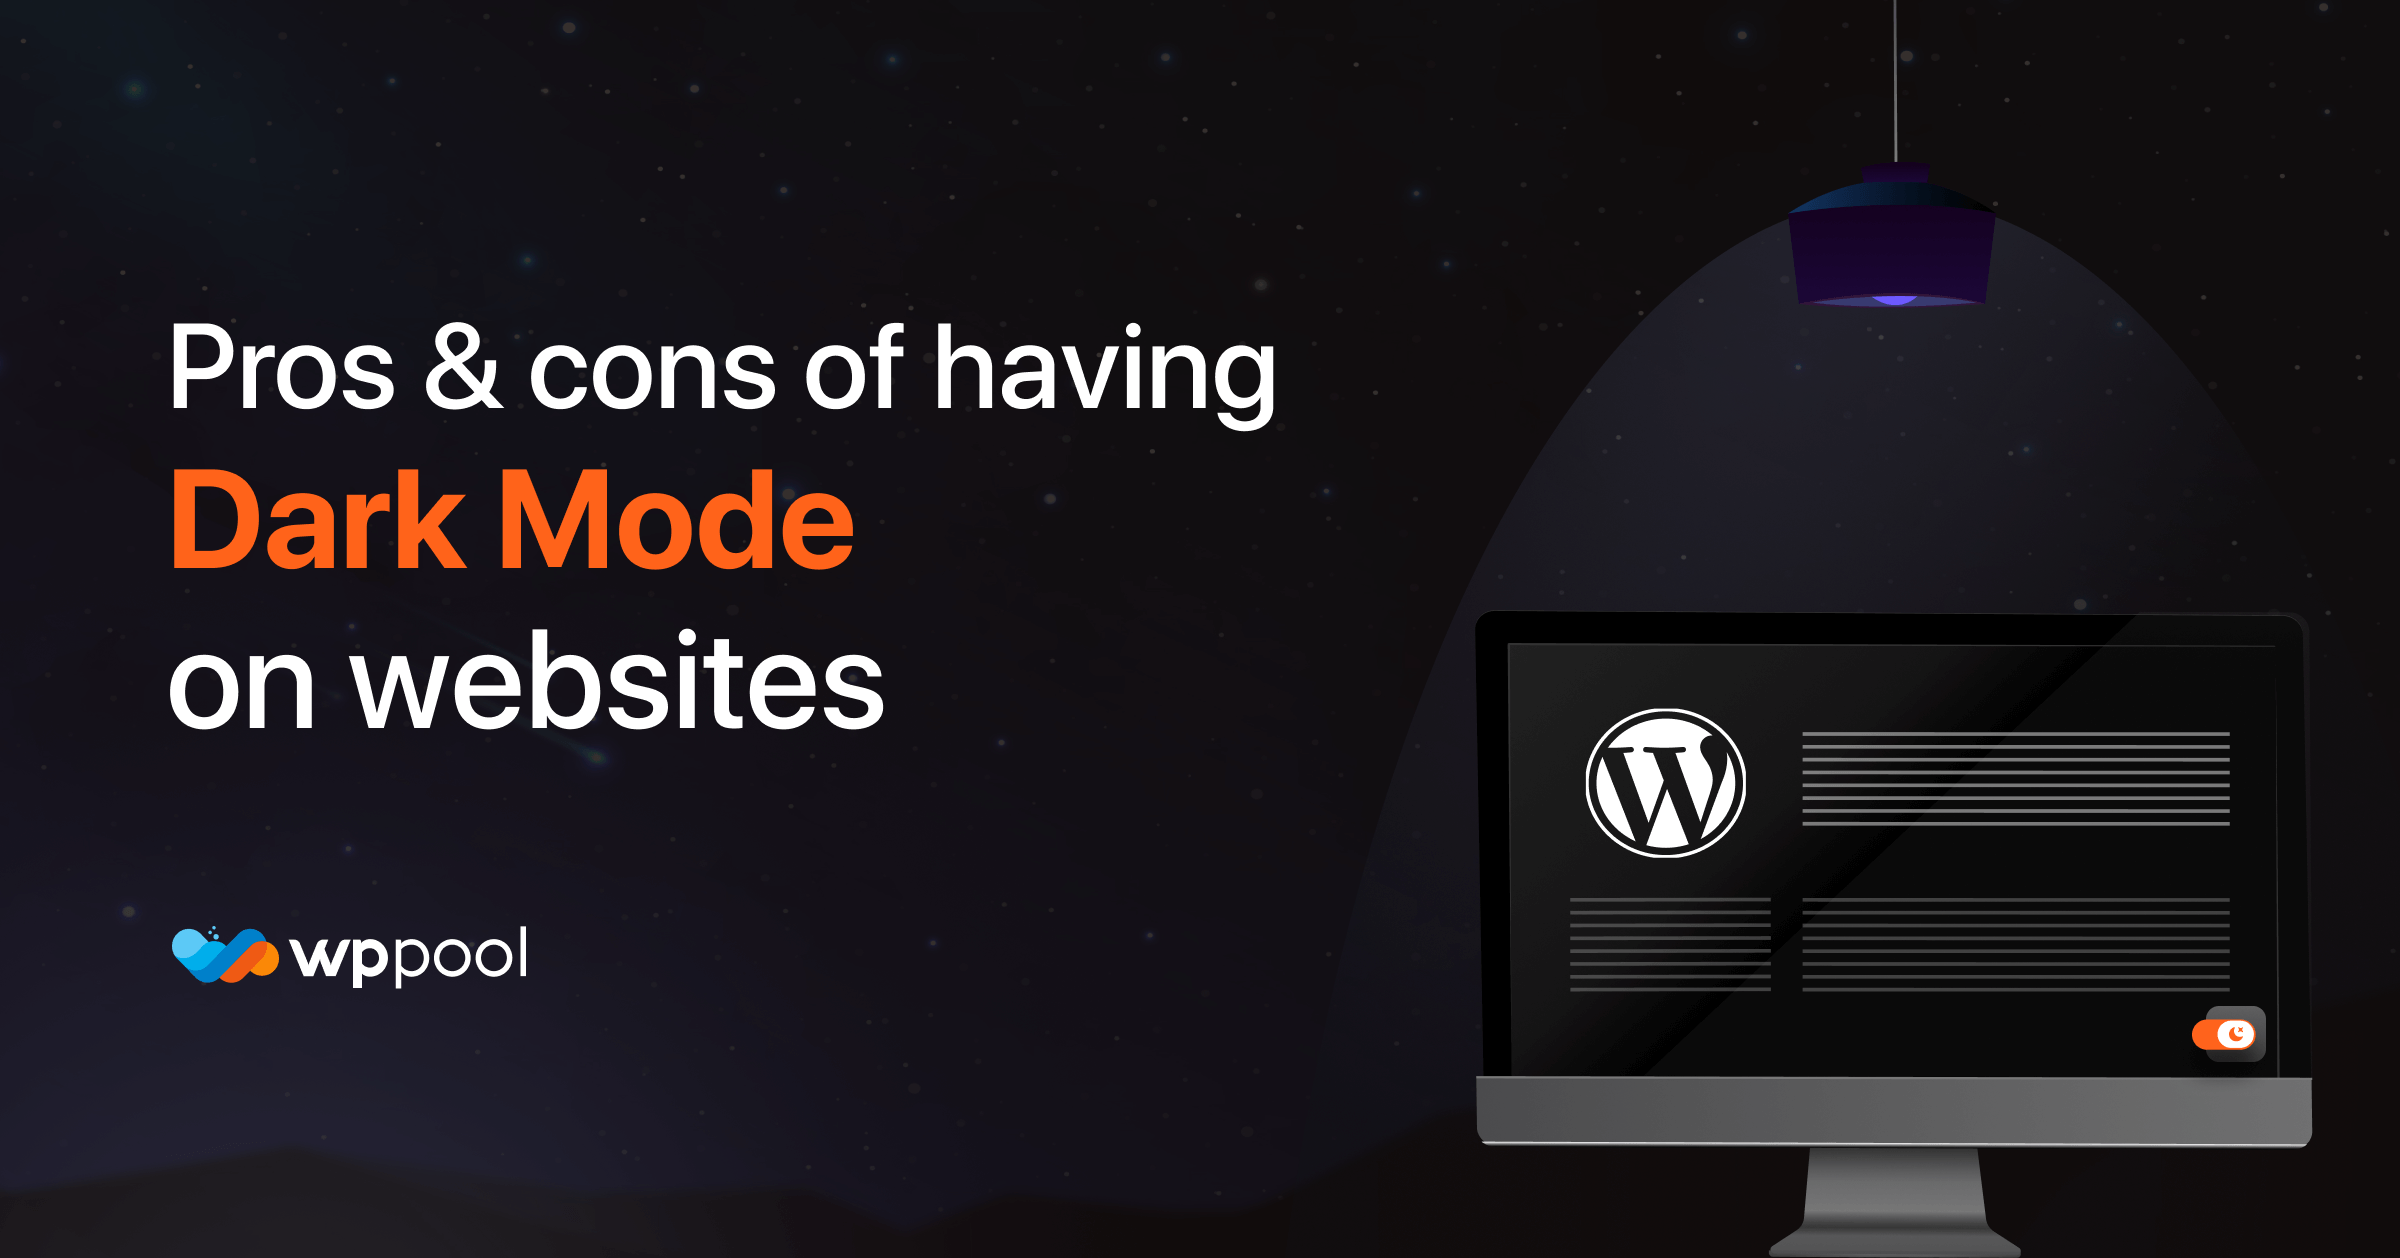 The pros and cons of having dark mode on websites